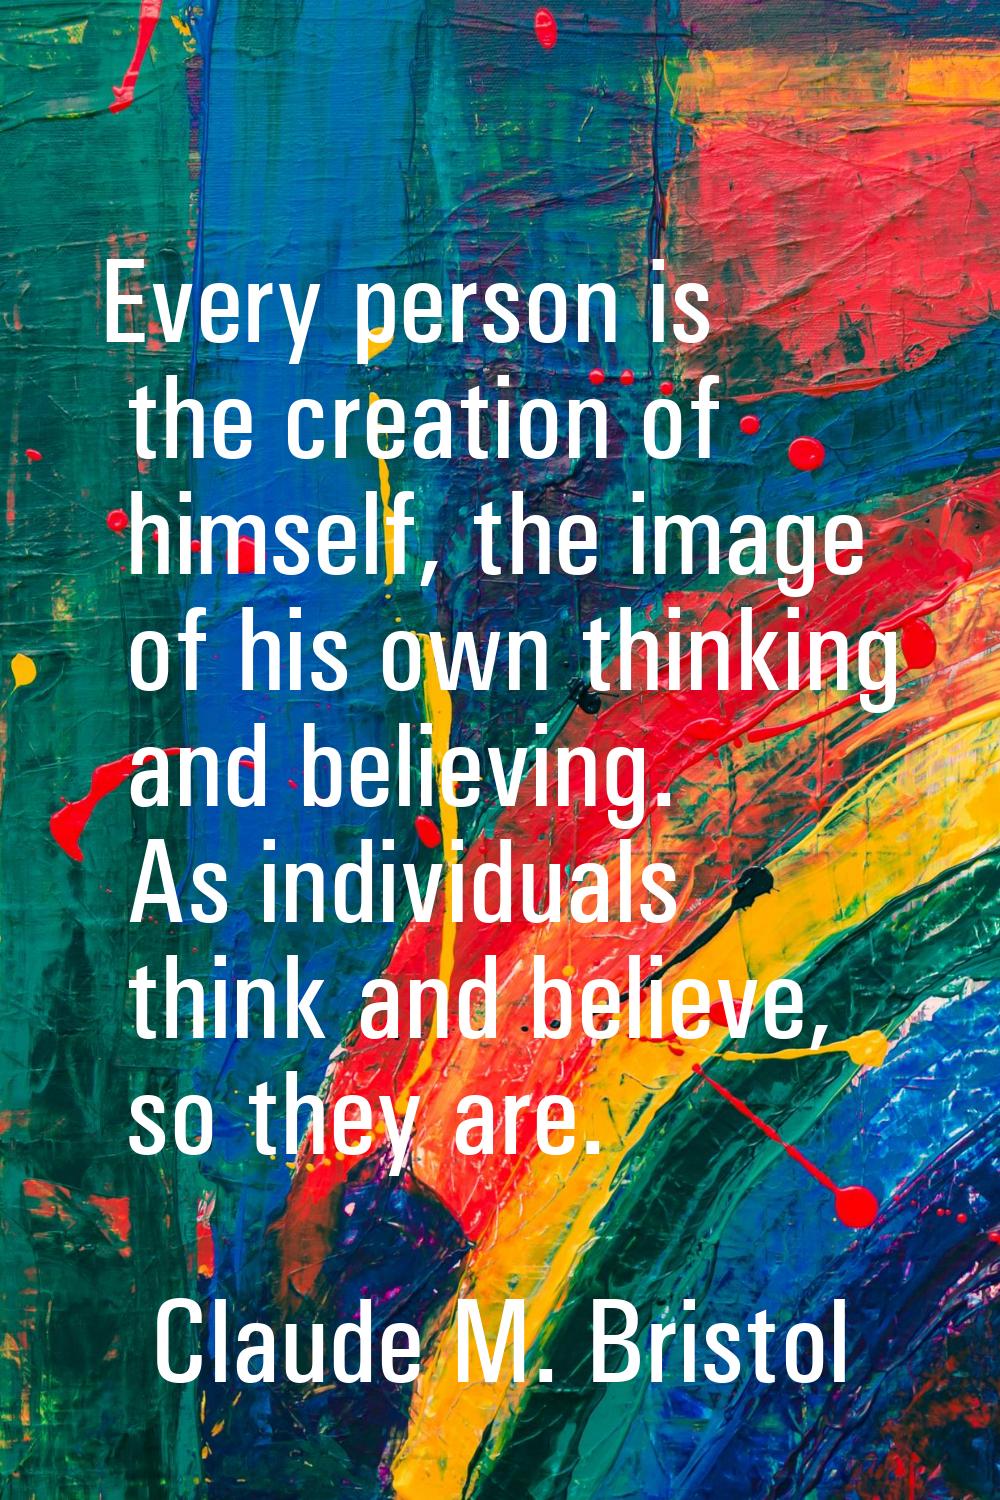 Every person is the creation of himself, the image of his own thinking and believing. As individual